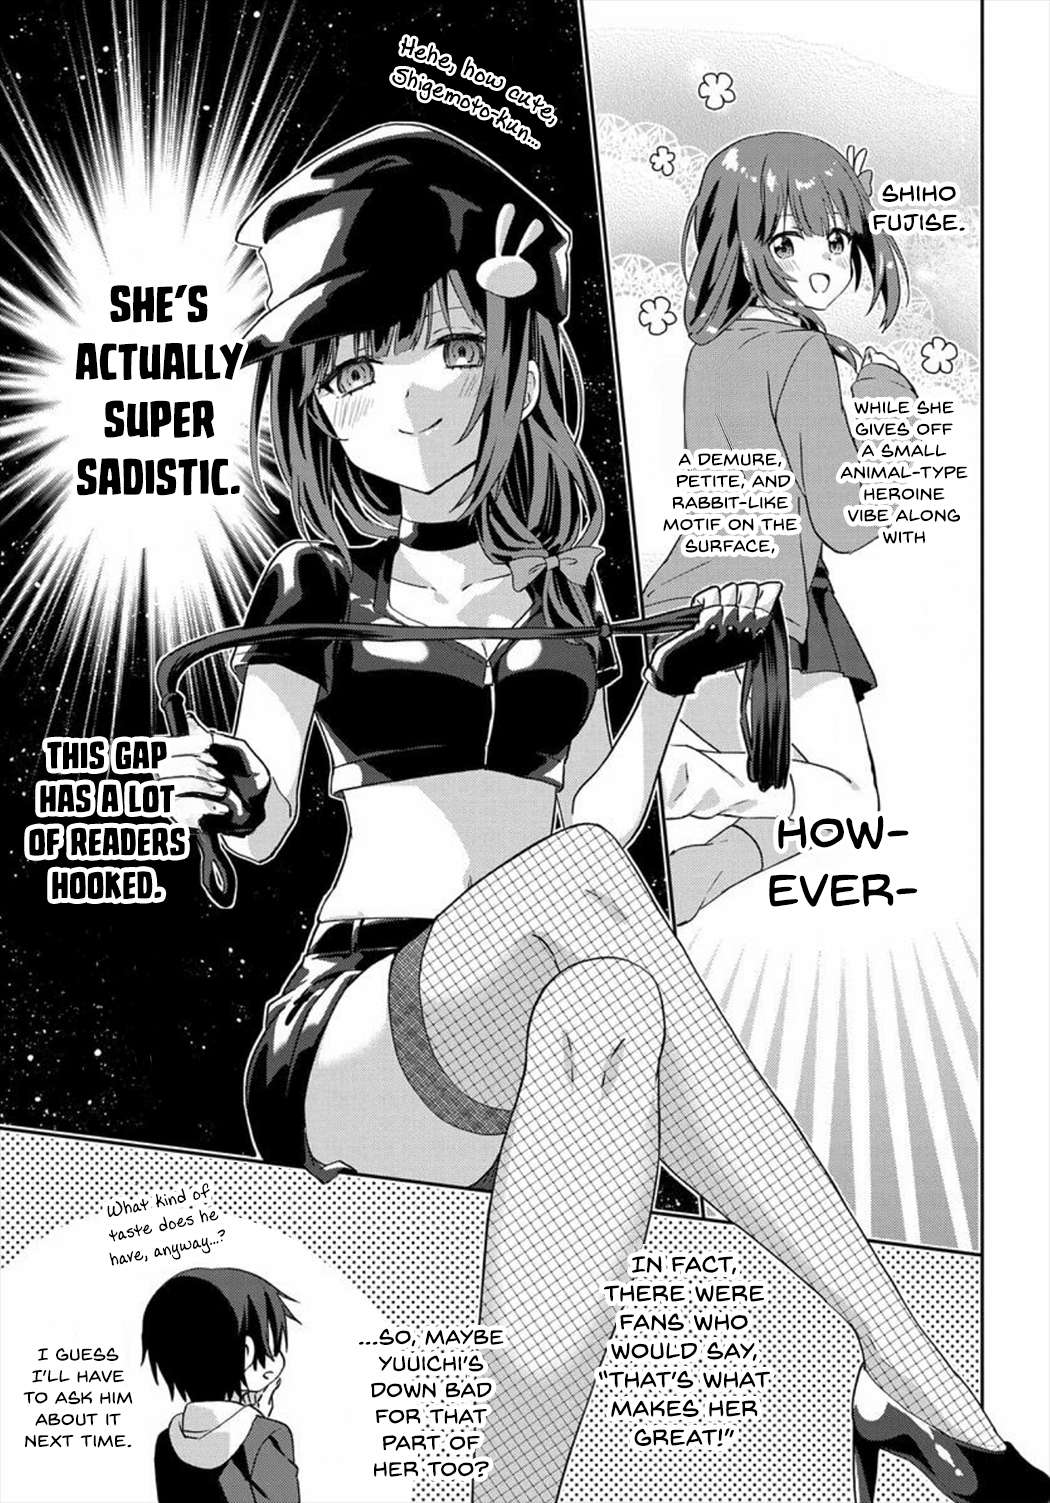 Since I’Ve Entered The World Of Romantic Comedy Manga, I’Ll Do My Best To Make The Losing Heroine Happy - chapter 7.2 - #4